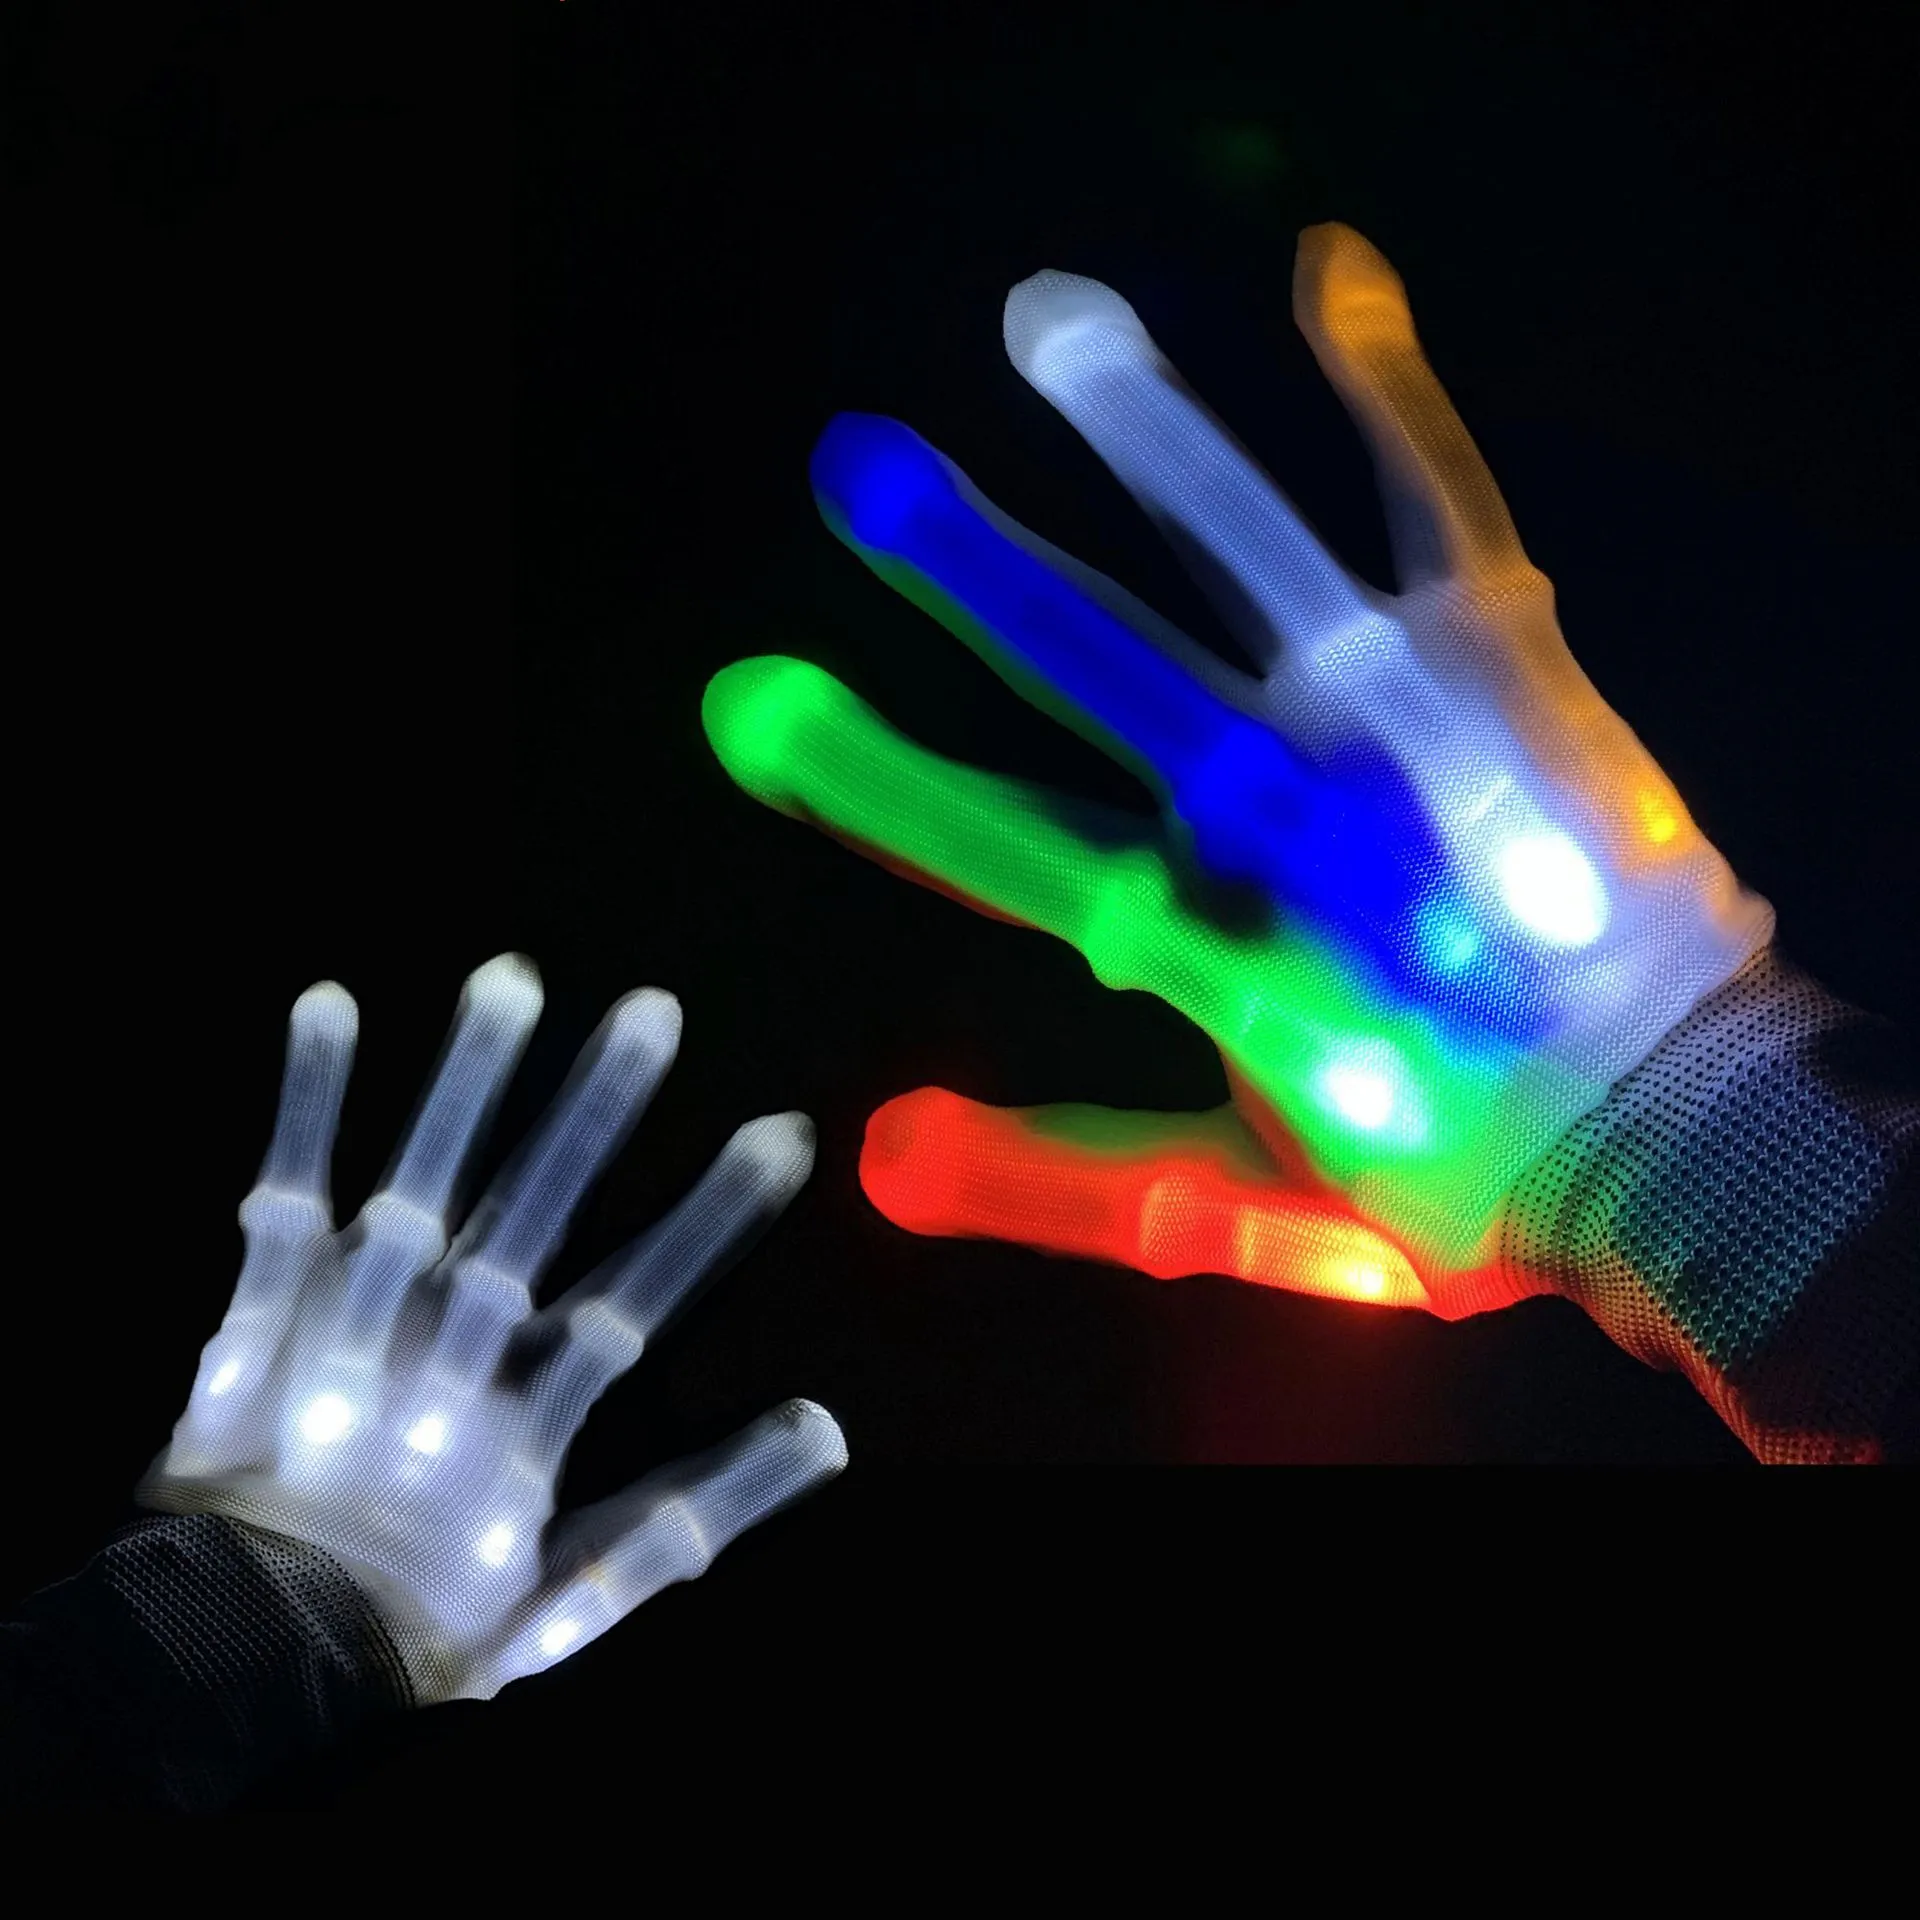 Pafu Christmas Cool Toys for Kids Adults Glowing Christmas Costume Clubbing Party Favors Novelty Toys LED Gloves Light Up Gloves